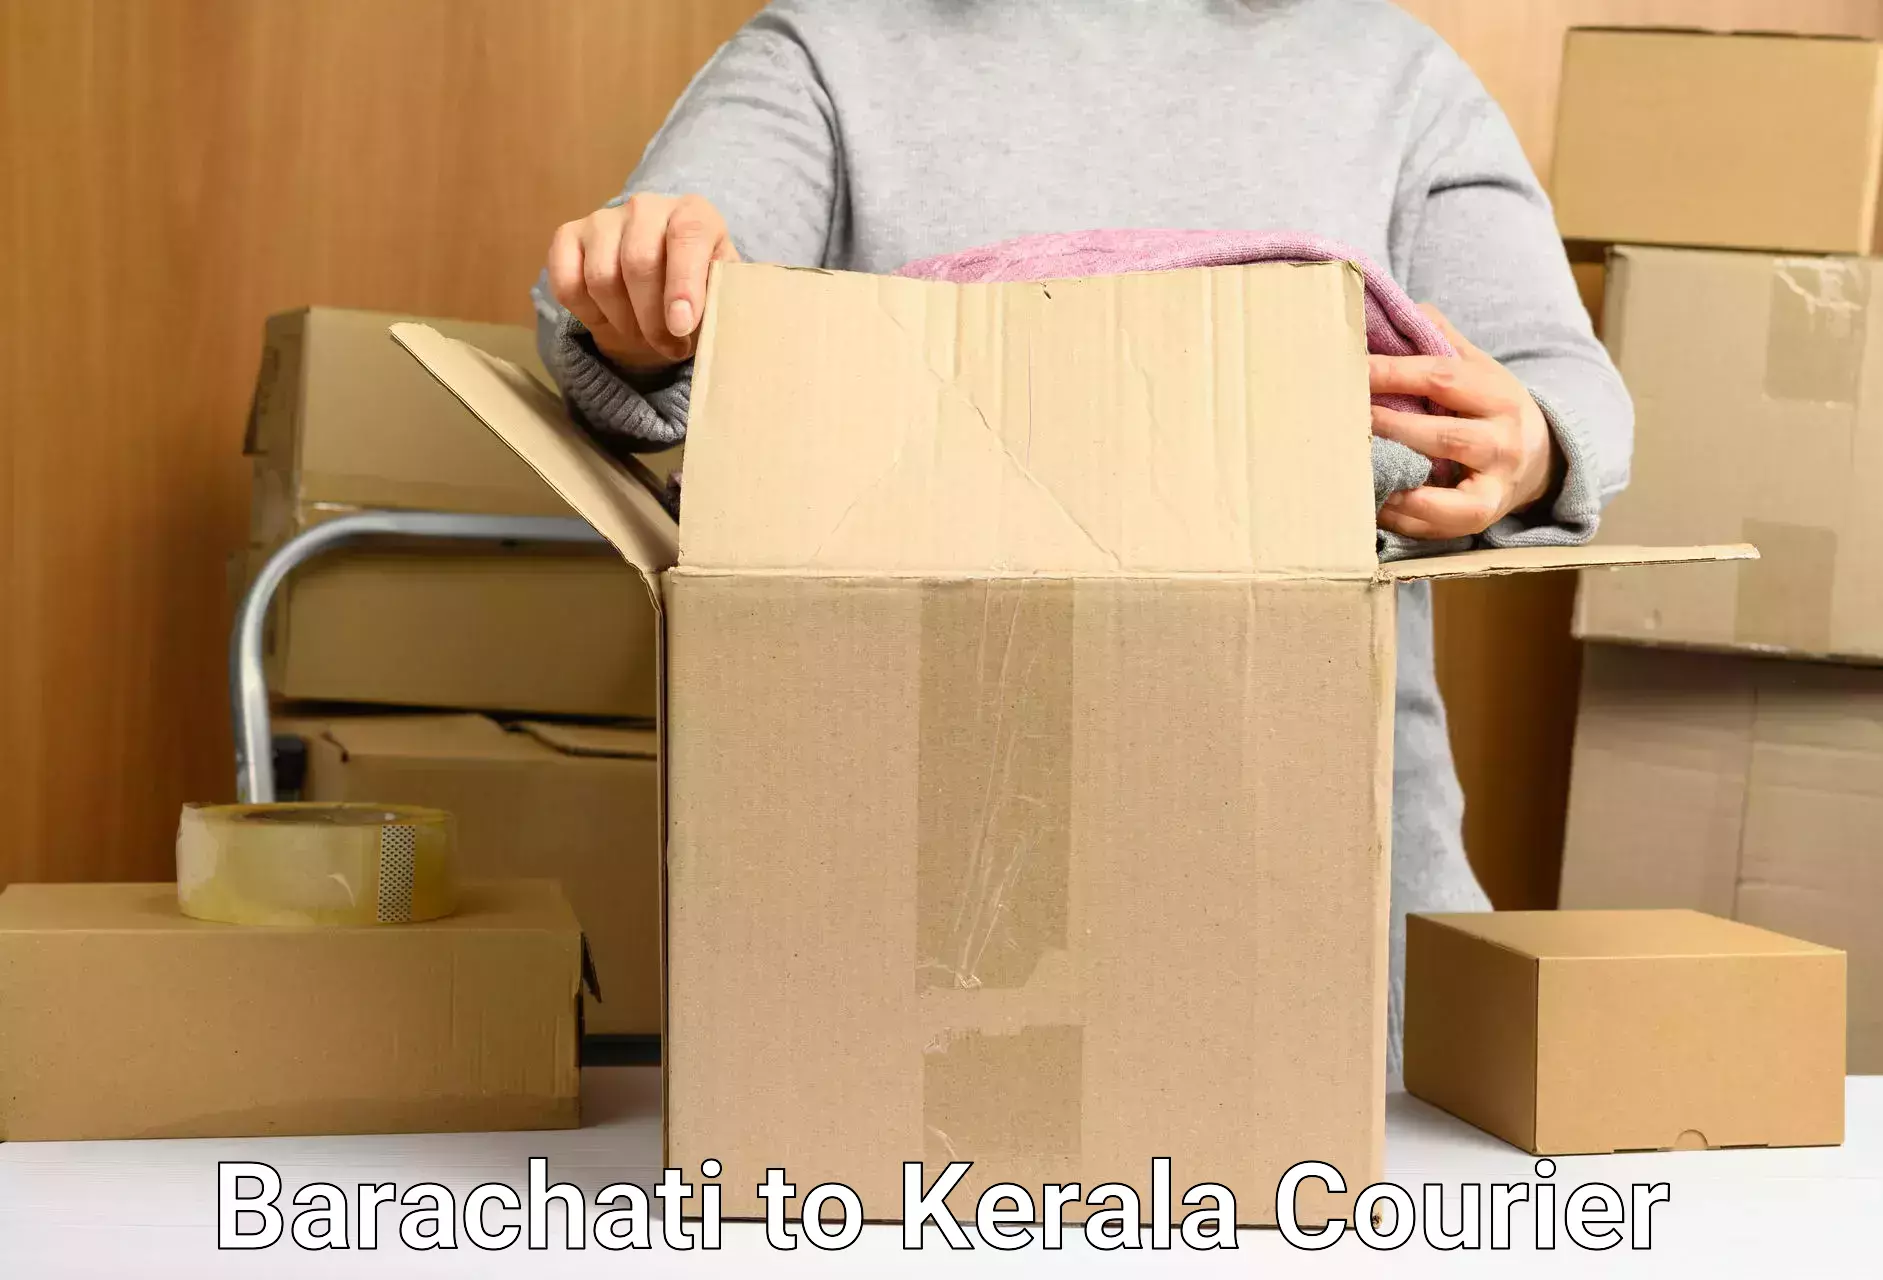 Overnight delivery in Barachati to Trivandrum